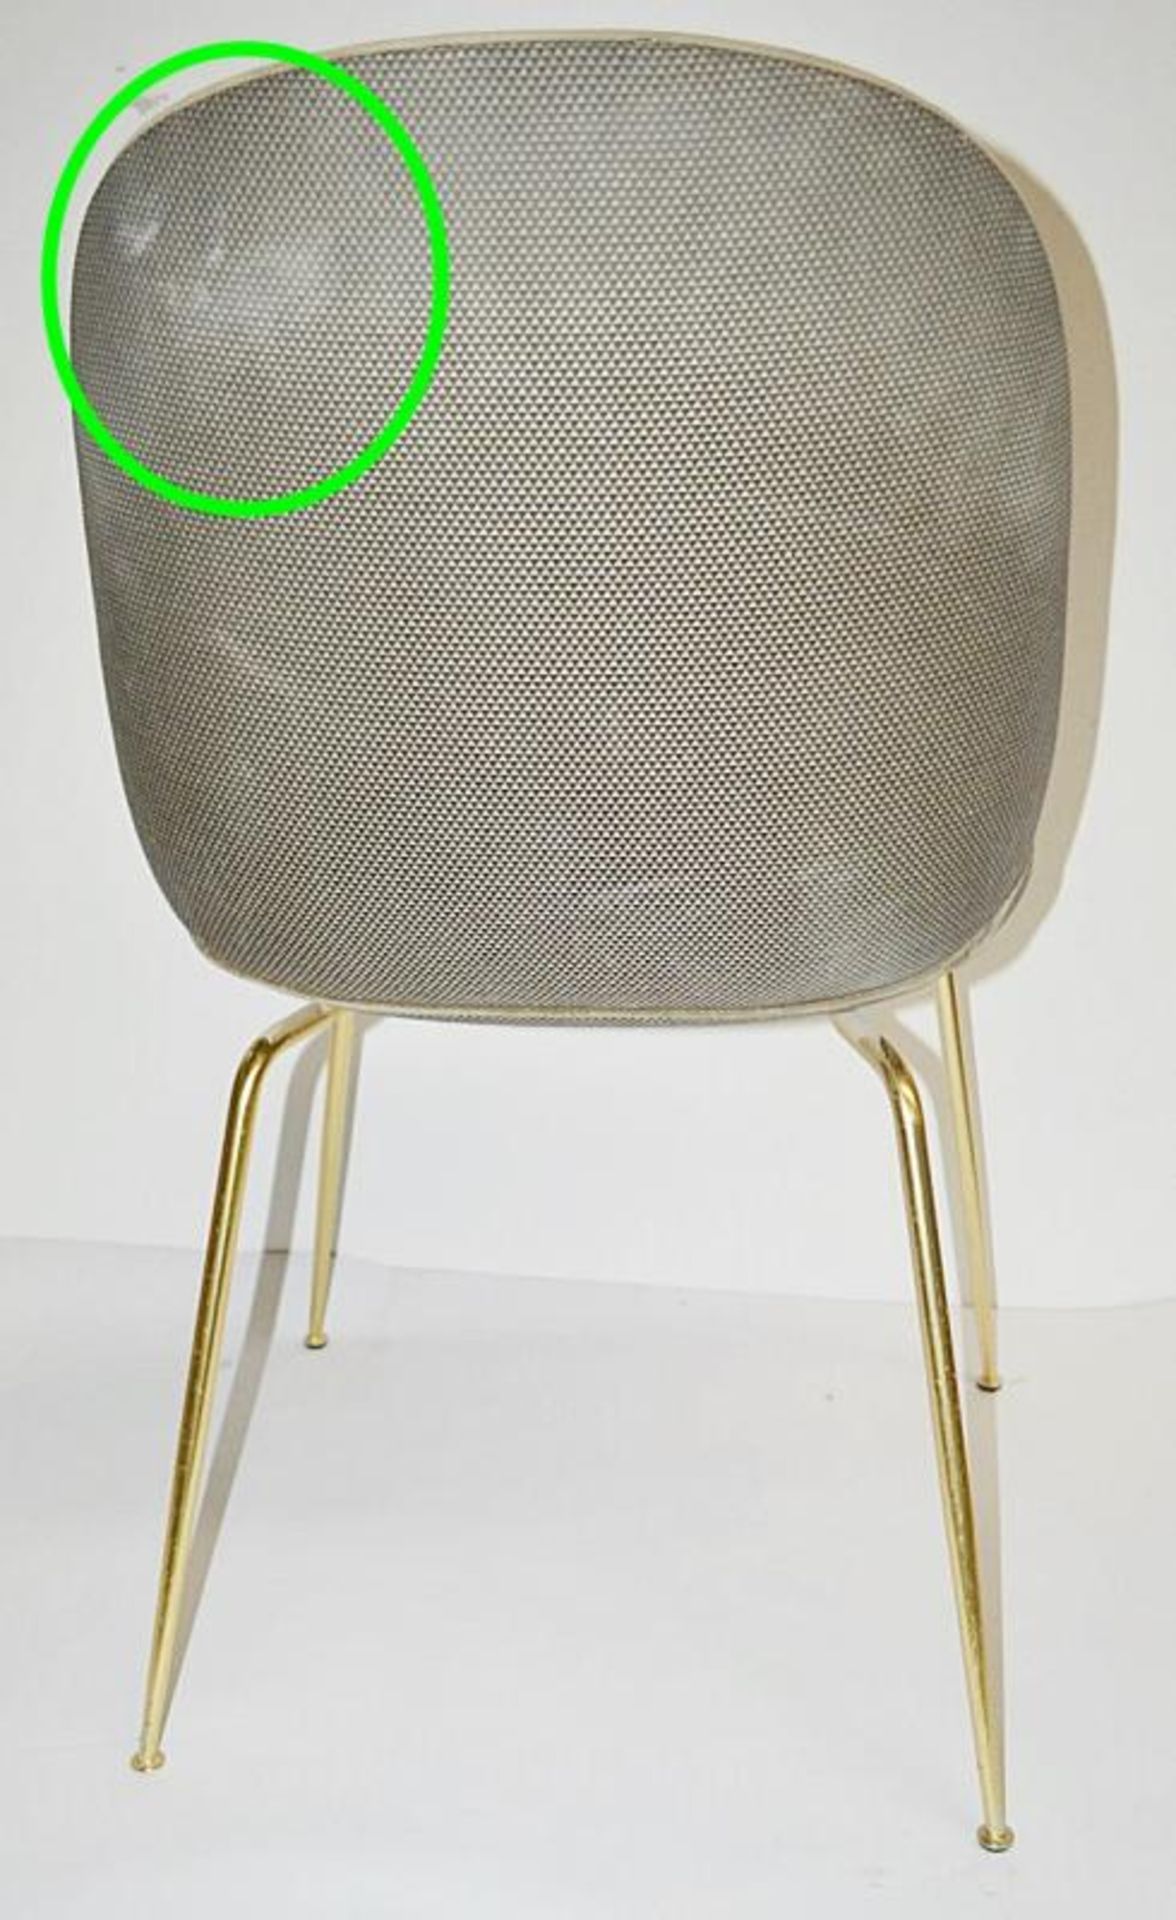 1 x GUBI 'Beetle Chair' - Designed By GamFratesi - Used, Please Read Condition Report - Dimensions: - Image 6 of 6